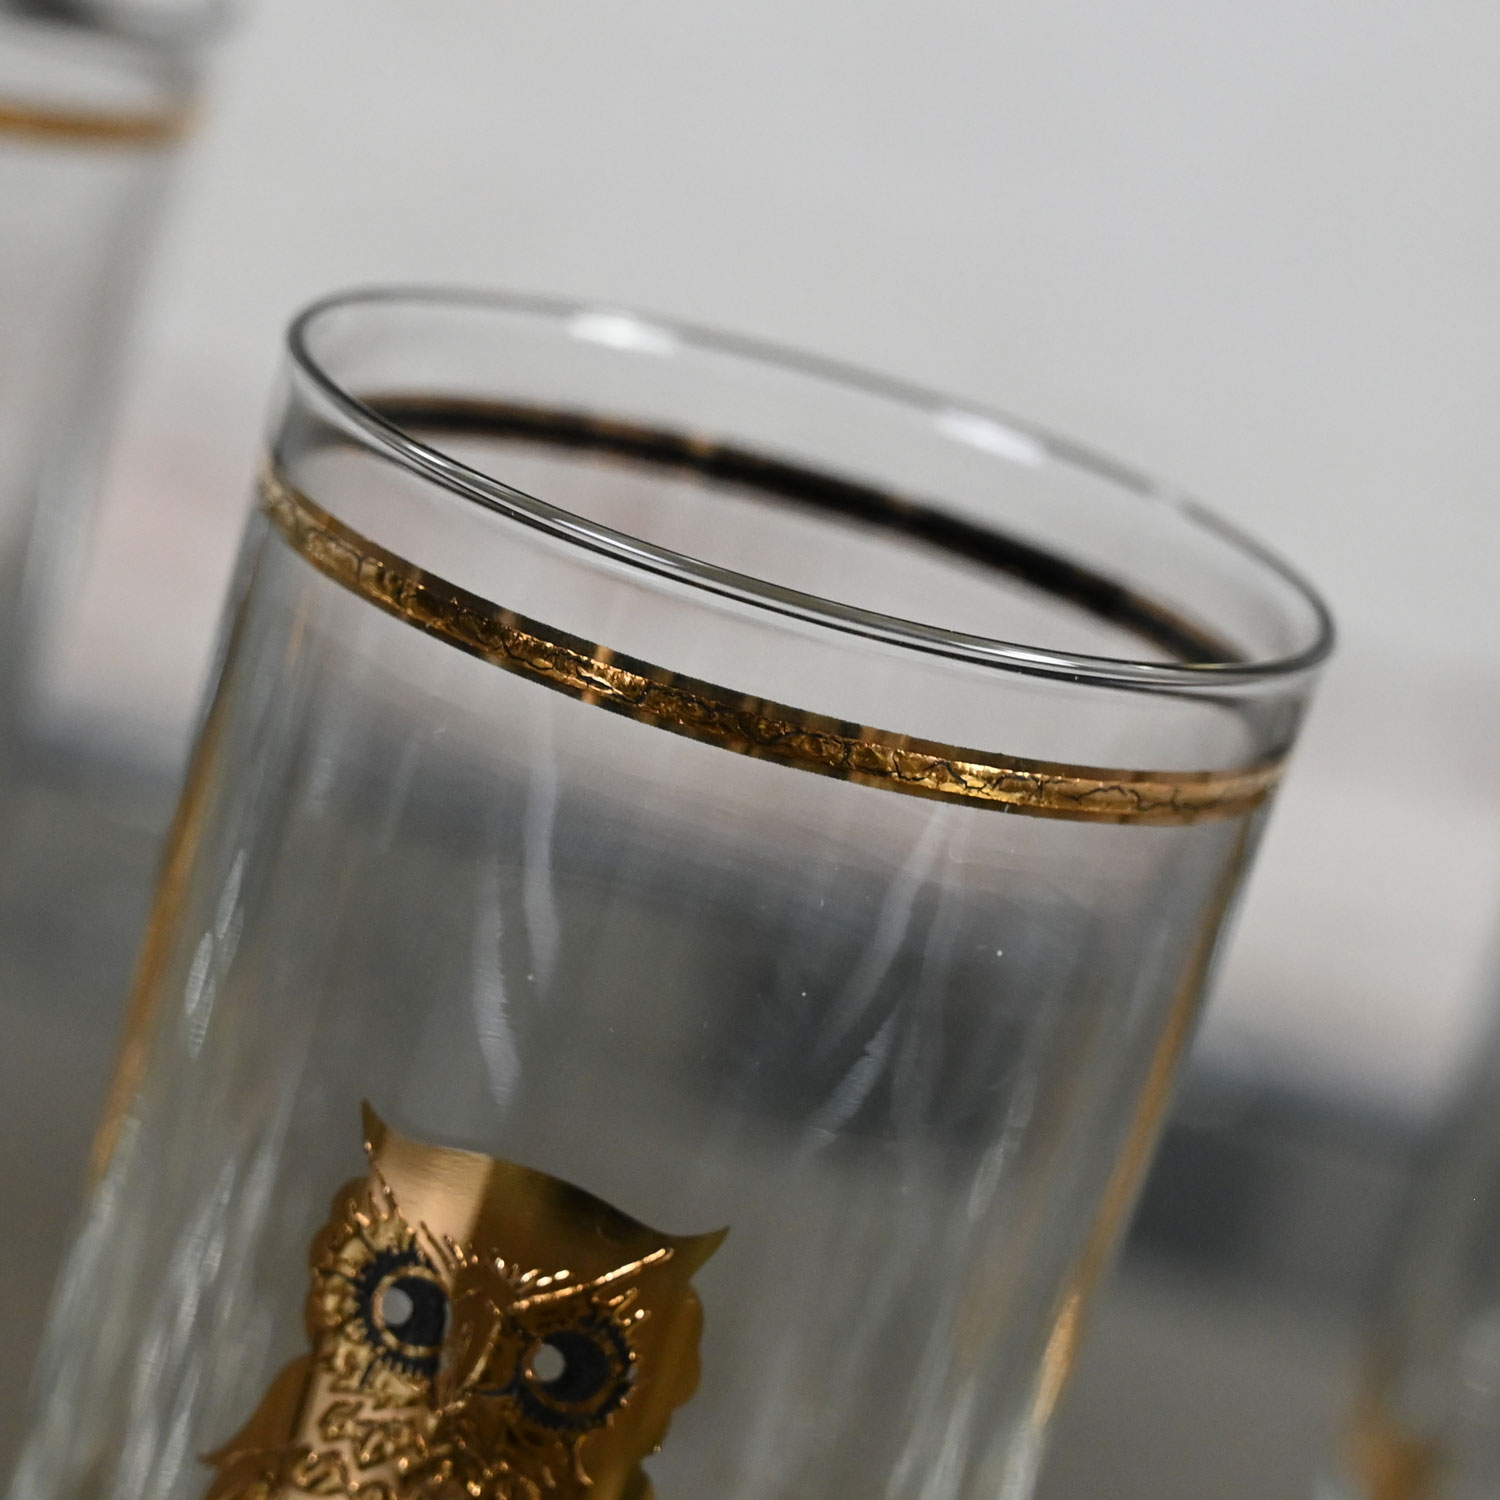 Vintage Mid Century Modern 6 Gold Embossed Owl Tom Collins Culver Glasses & Couroc Tray with Wood Owl Inlay